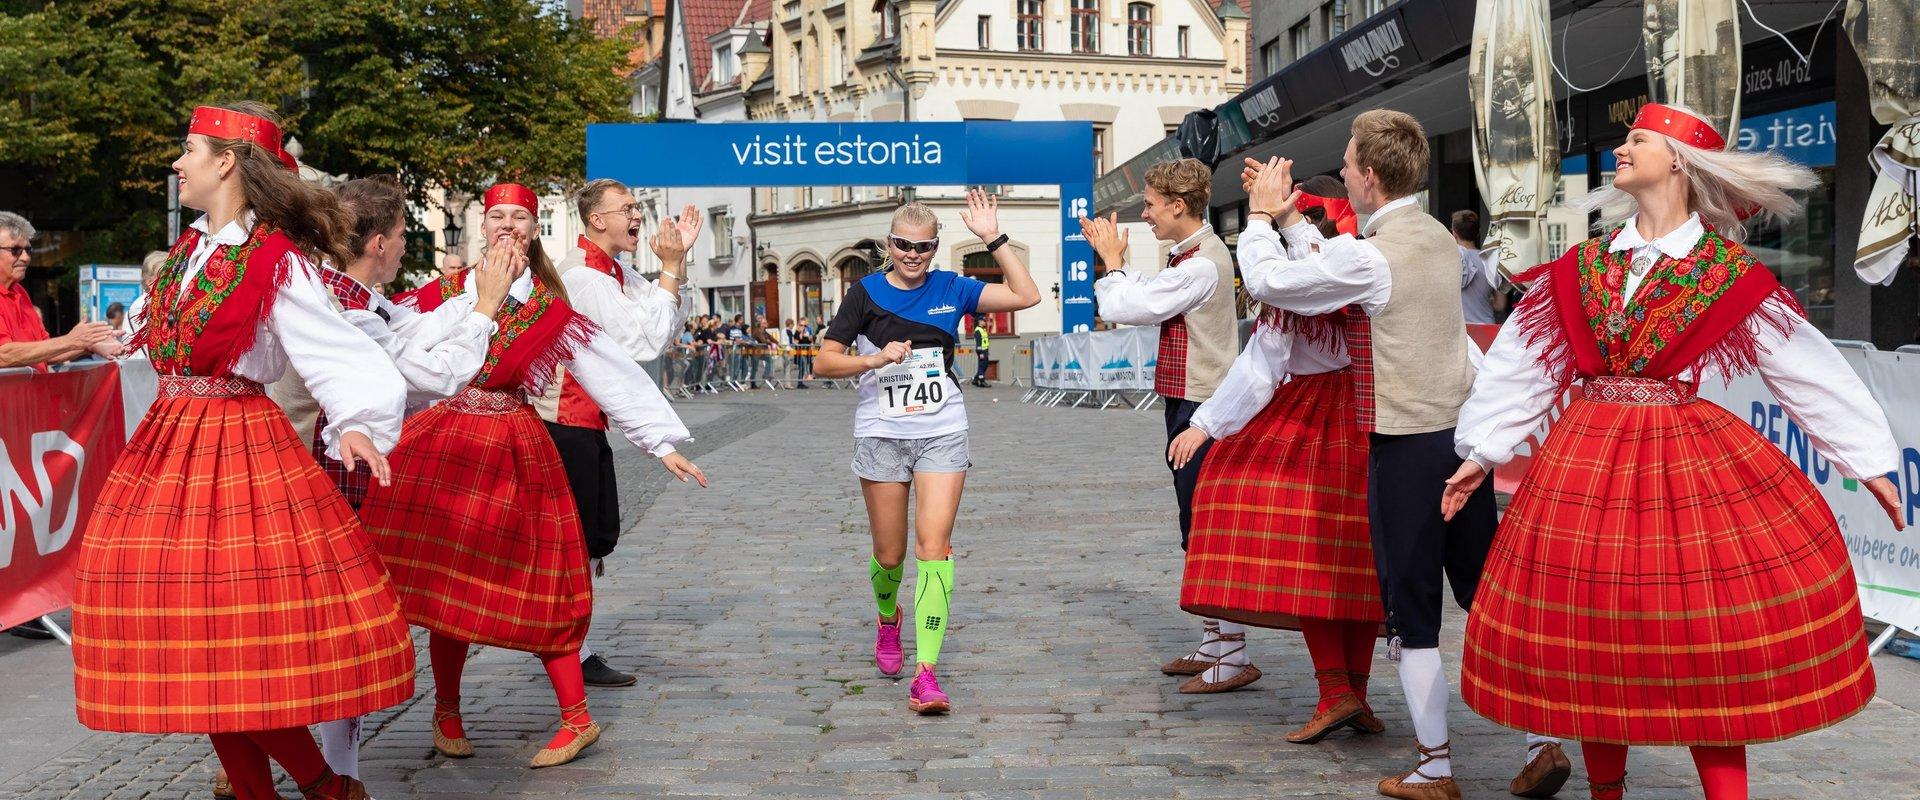 A competitor of the Tallinn Marathon with folkdancers